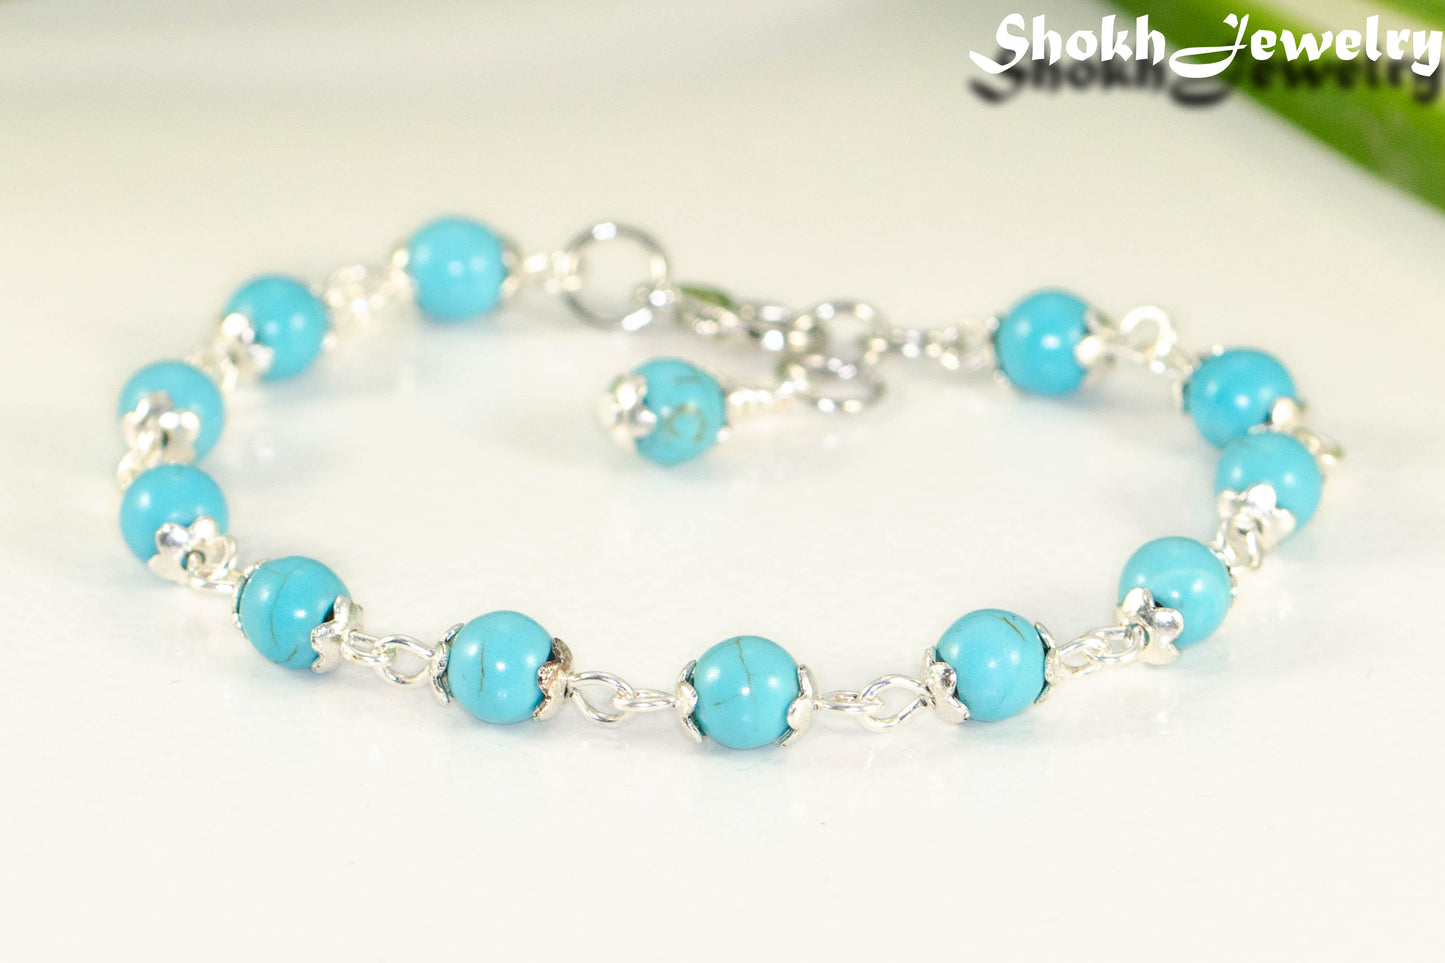 Close up of 6mm Turquoise Howlite Bracelet.